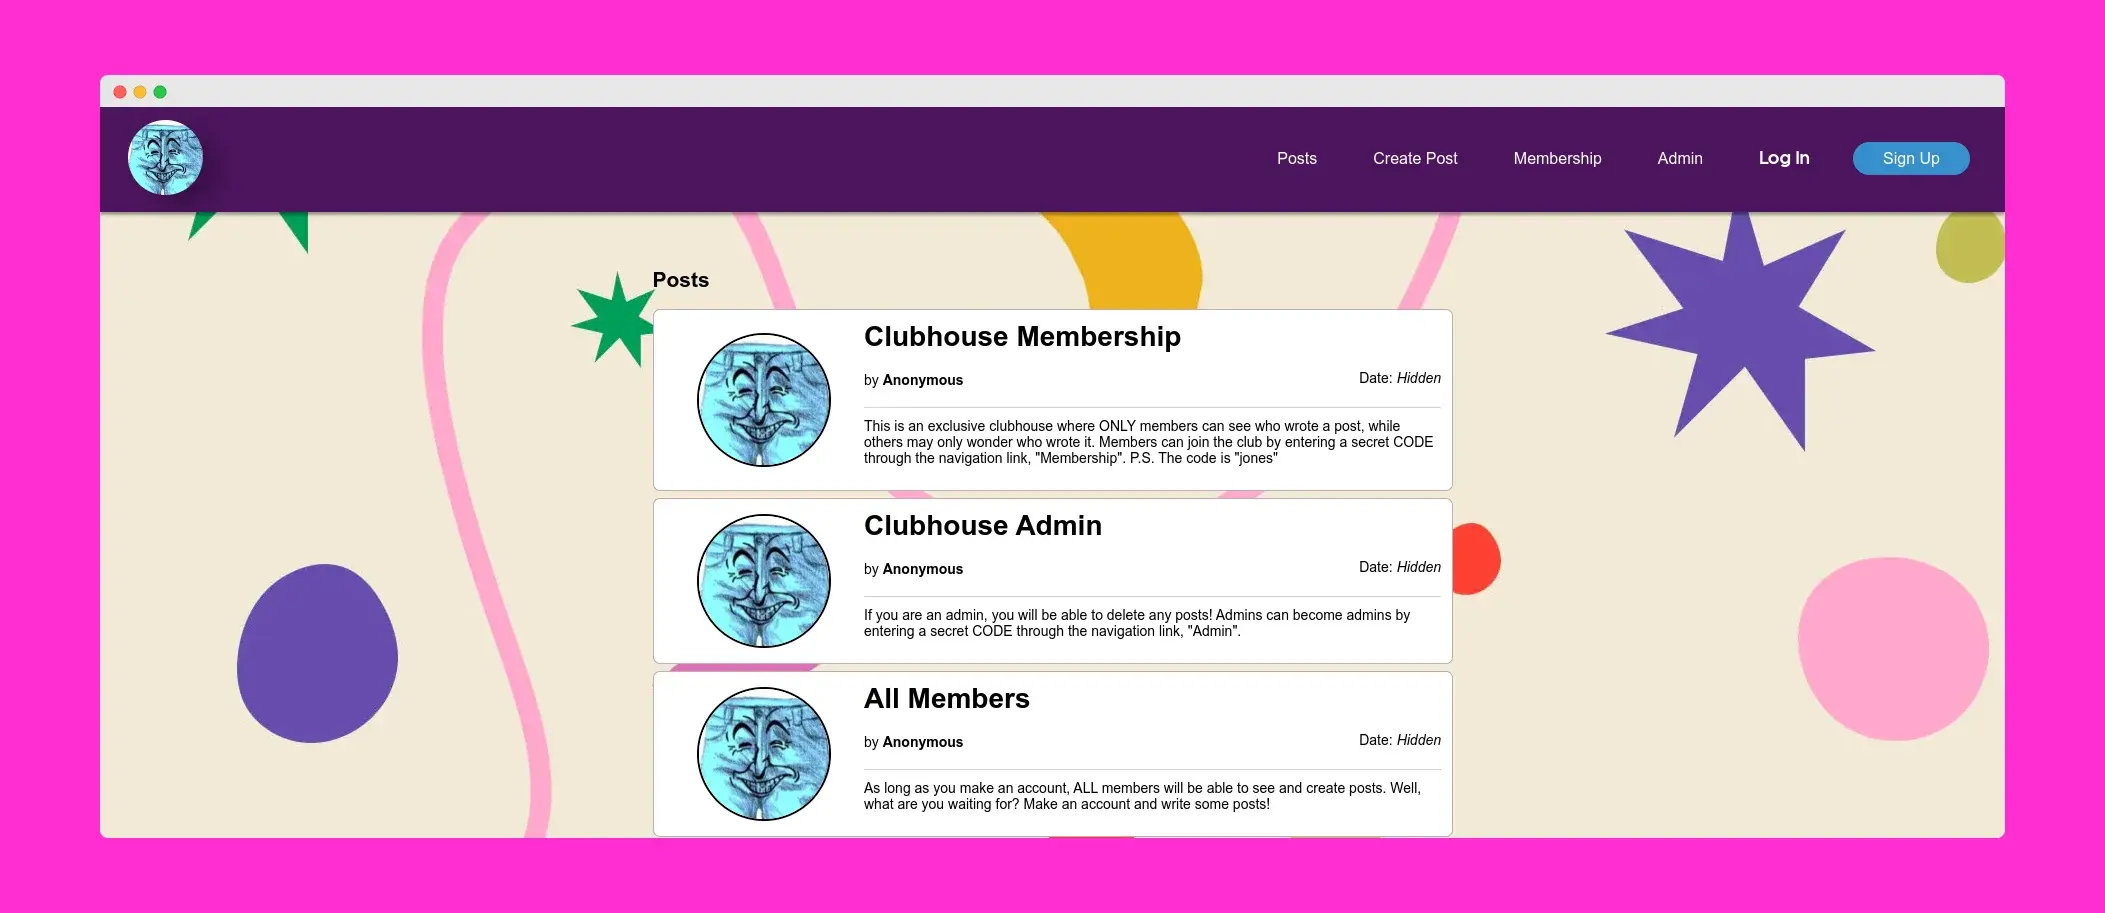 A mobile device screen displaying posts including one titled 'Welcome to Clubhouse'. The site promises 'the best, most innovative social messaging experience'. Options to 'Sign Up', 'Log In', and 'View Posts' are visible. The site has a purple header